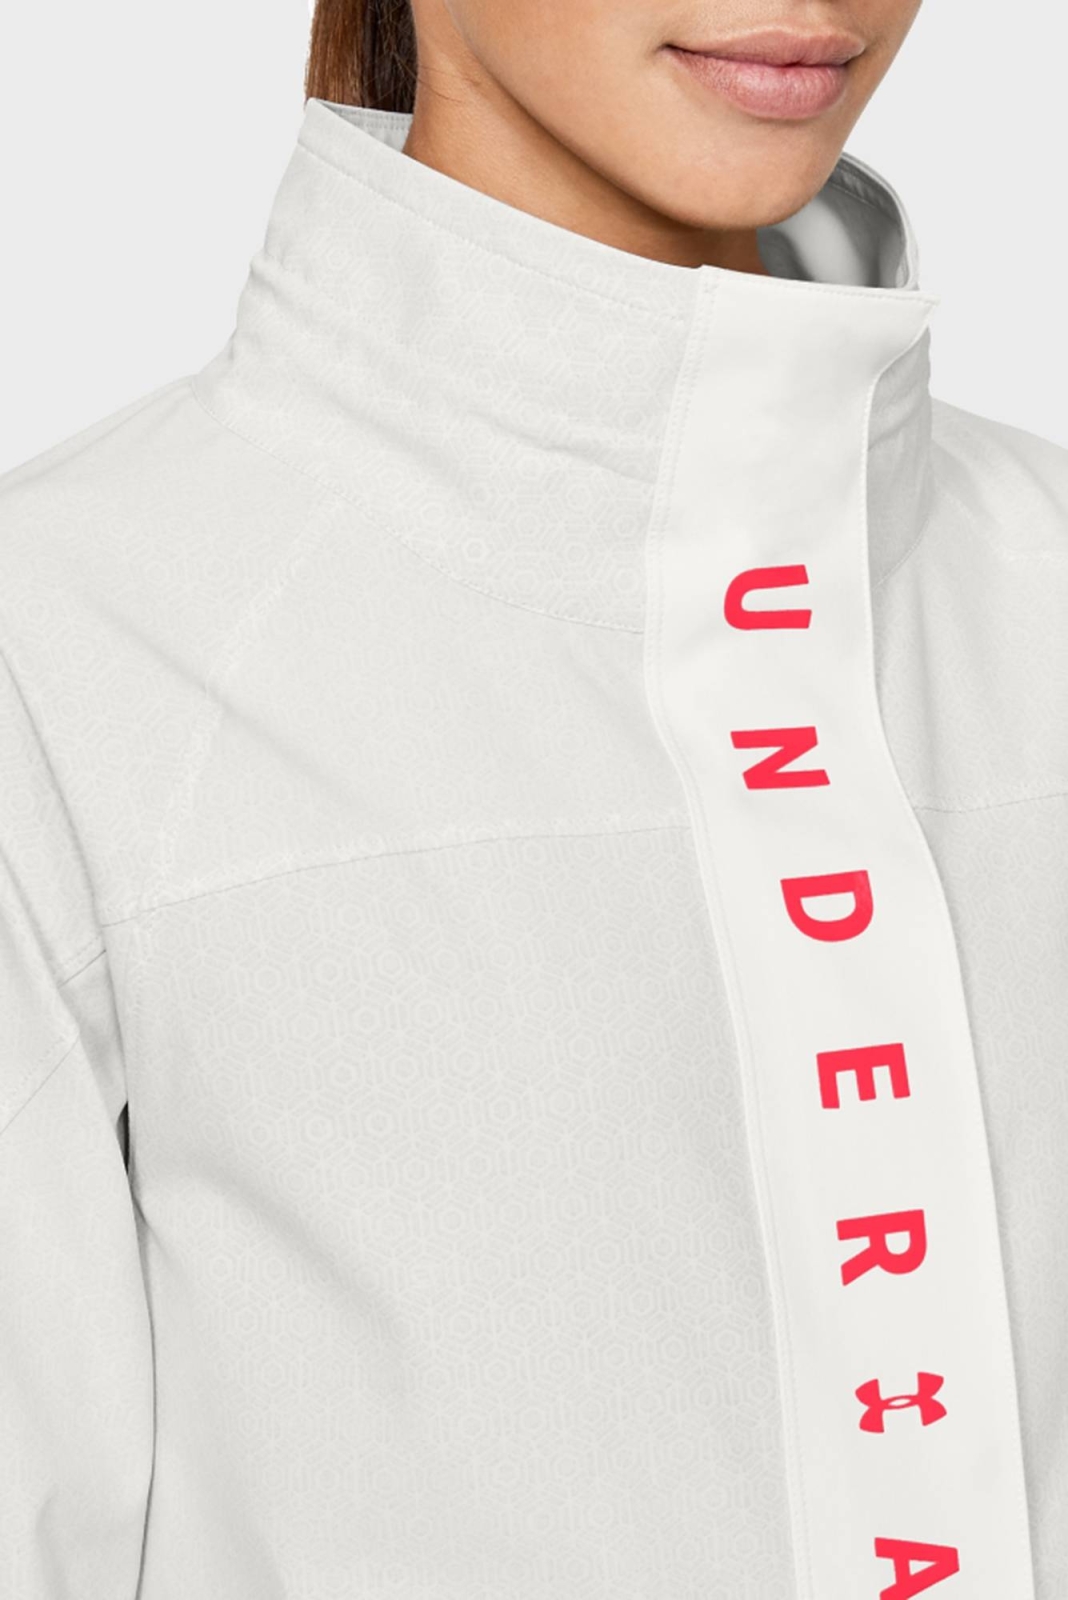 UNDER ARMOUR RECOVER WOVEN JACKET